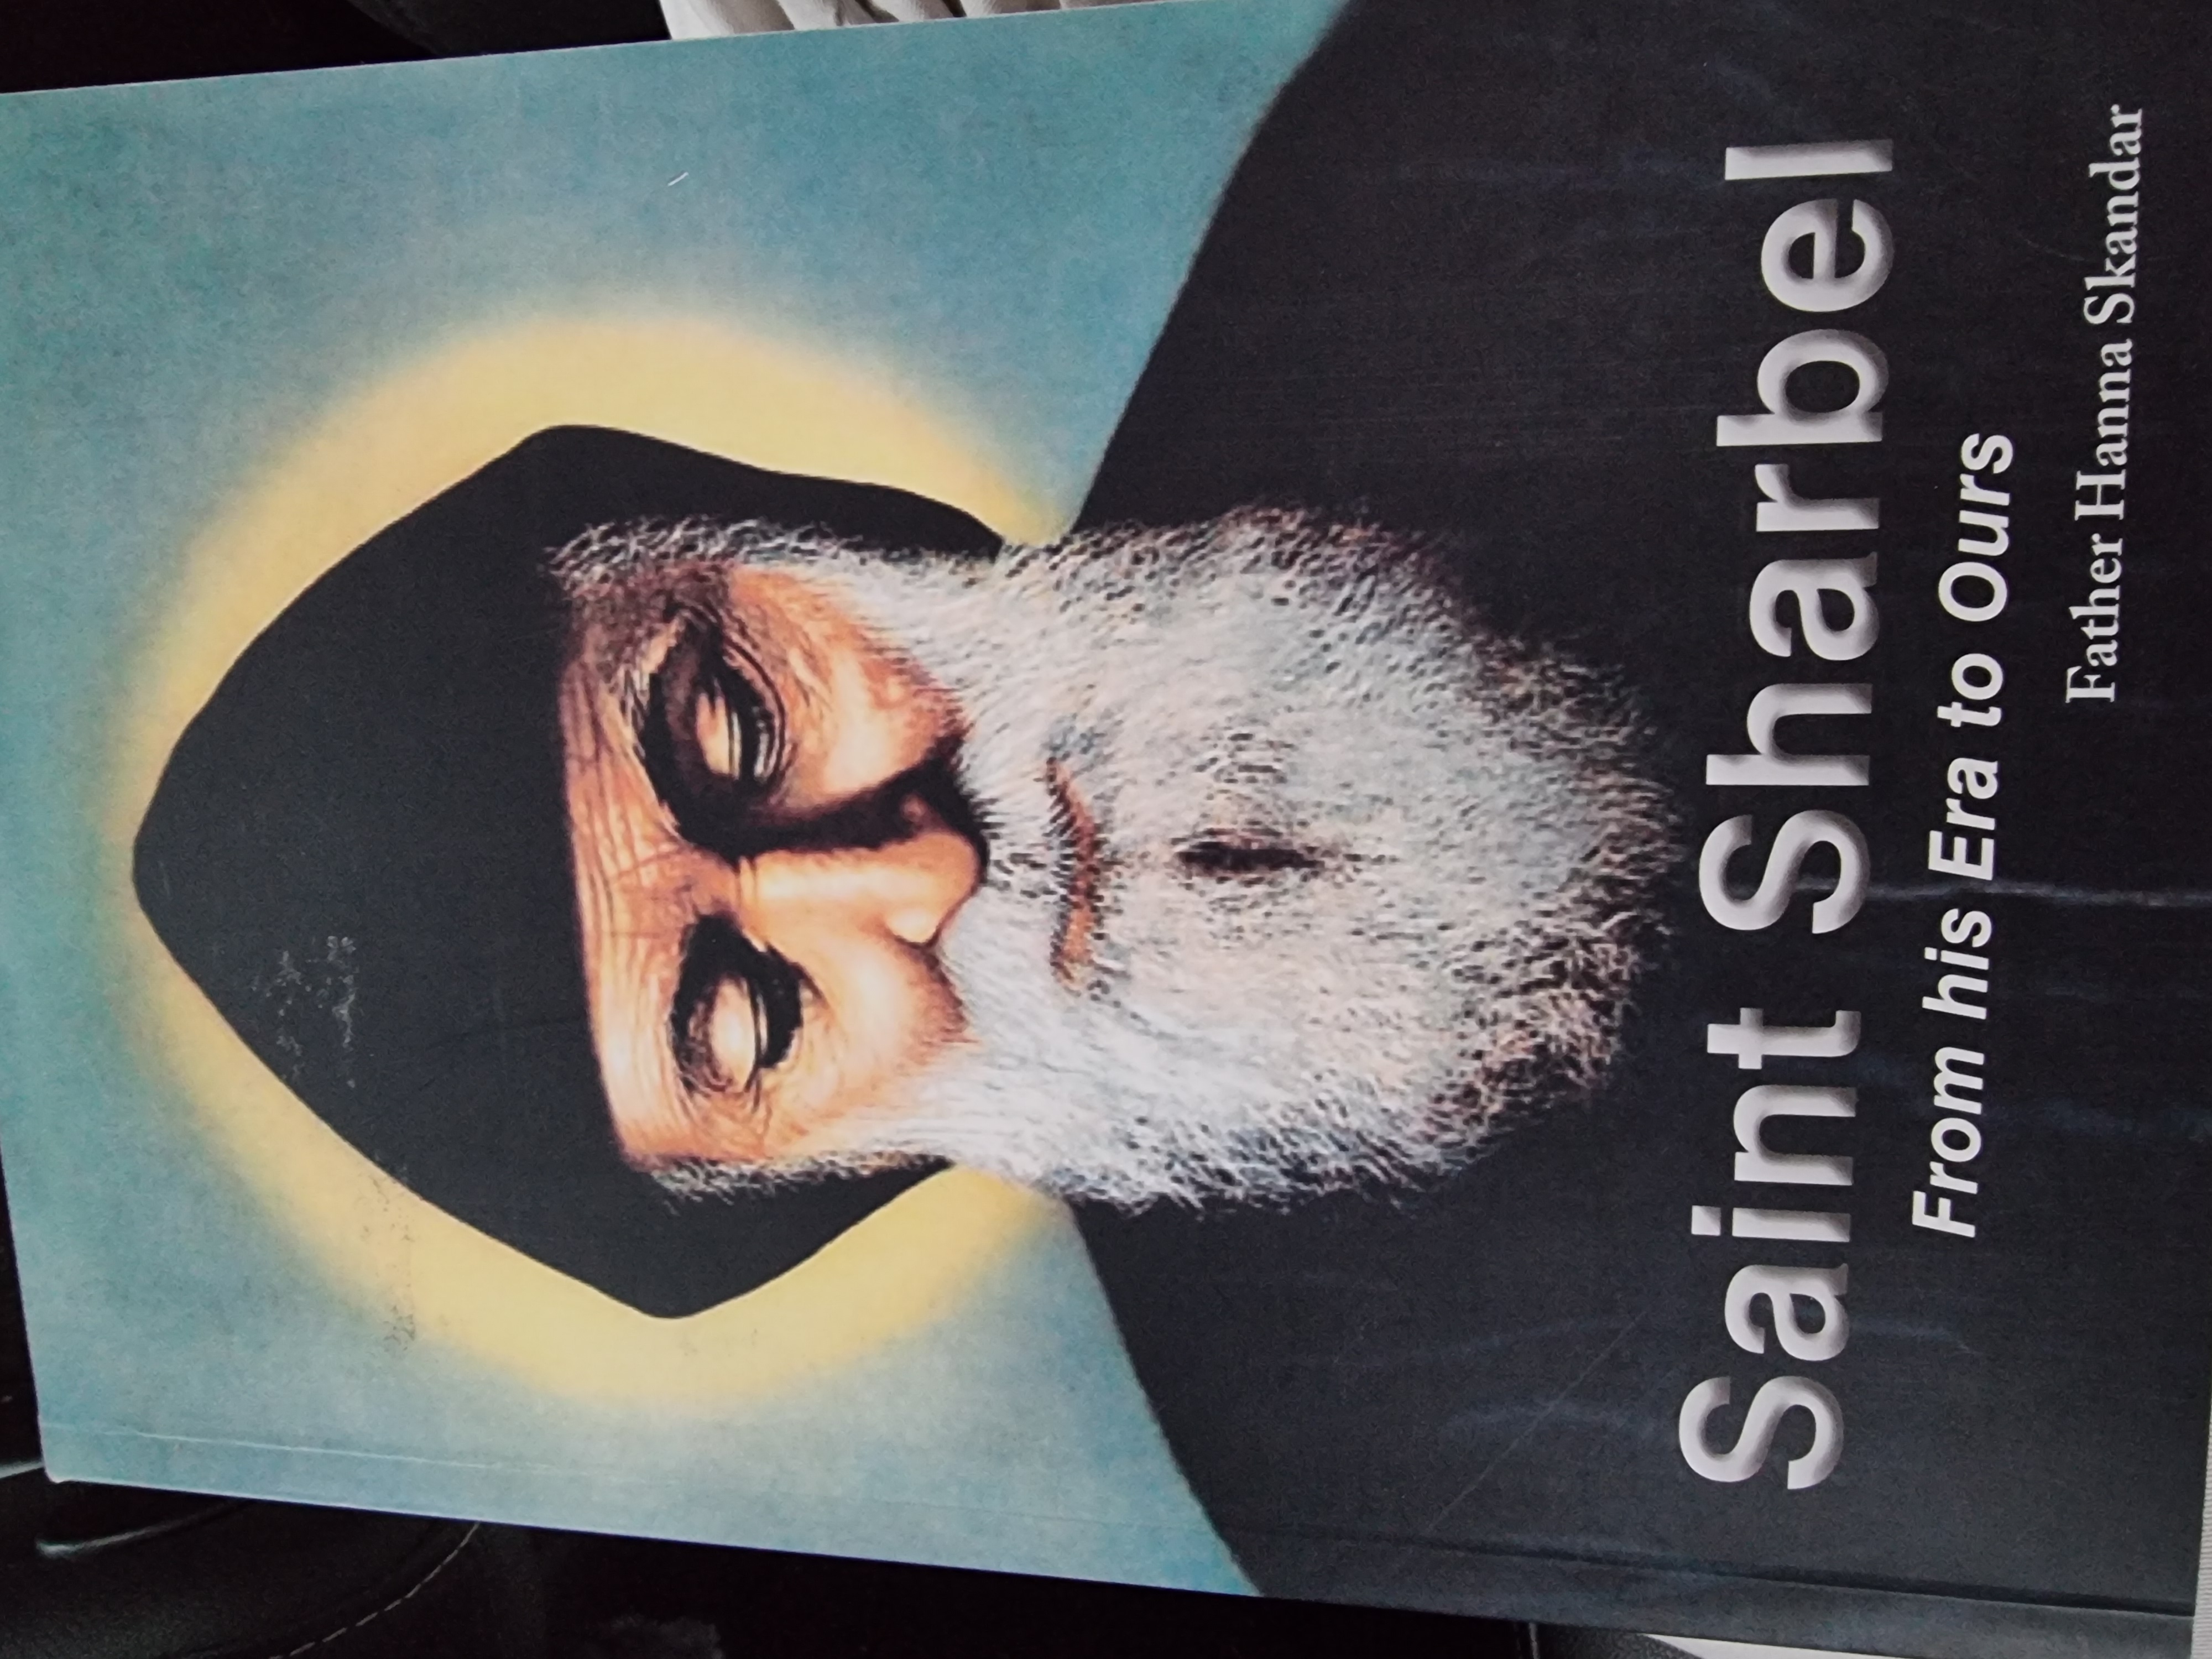 Saint Sharbel - From his Era to Ours